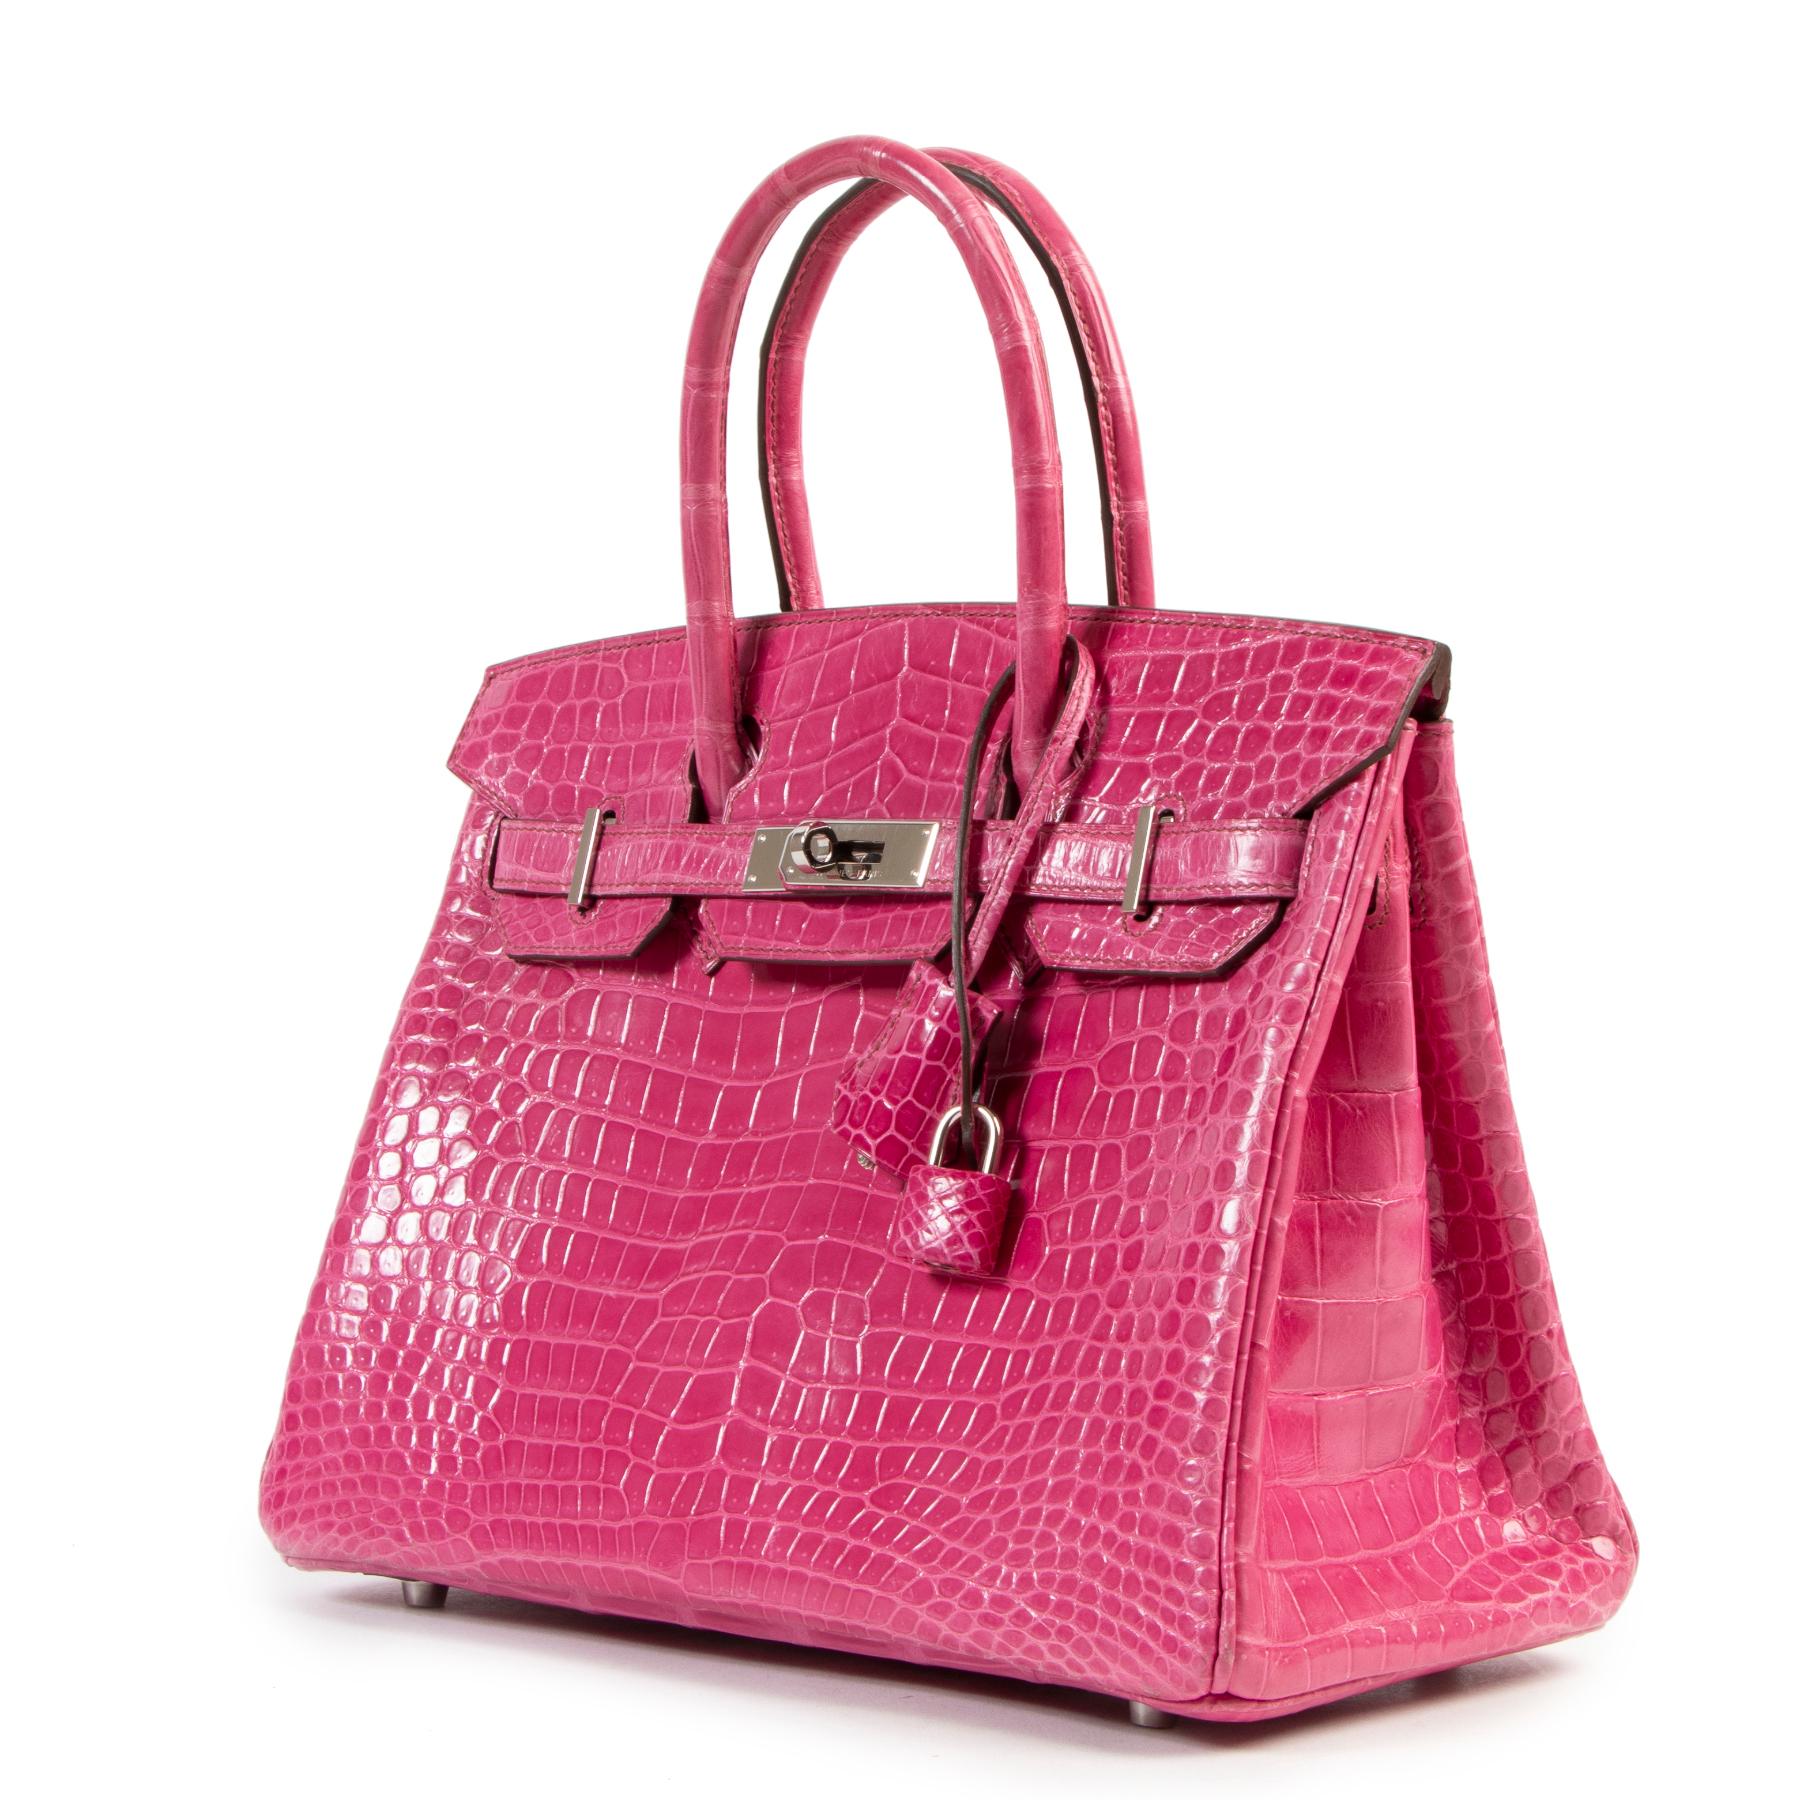 Hermès Birkin 30 Croco Porosus Lisse Fuchsia PHW

This extremely rare and precious Hermès Birkin 30 Croco Porosus Lisse Fuchsia truly is the height of luxury. Its bright fuchsia hue is the perfect shade of pink, whilst the impeccable crocodile